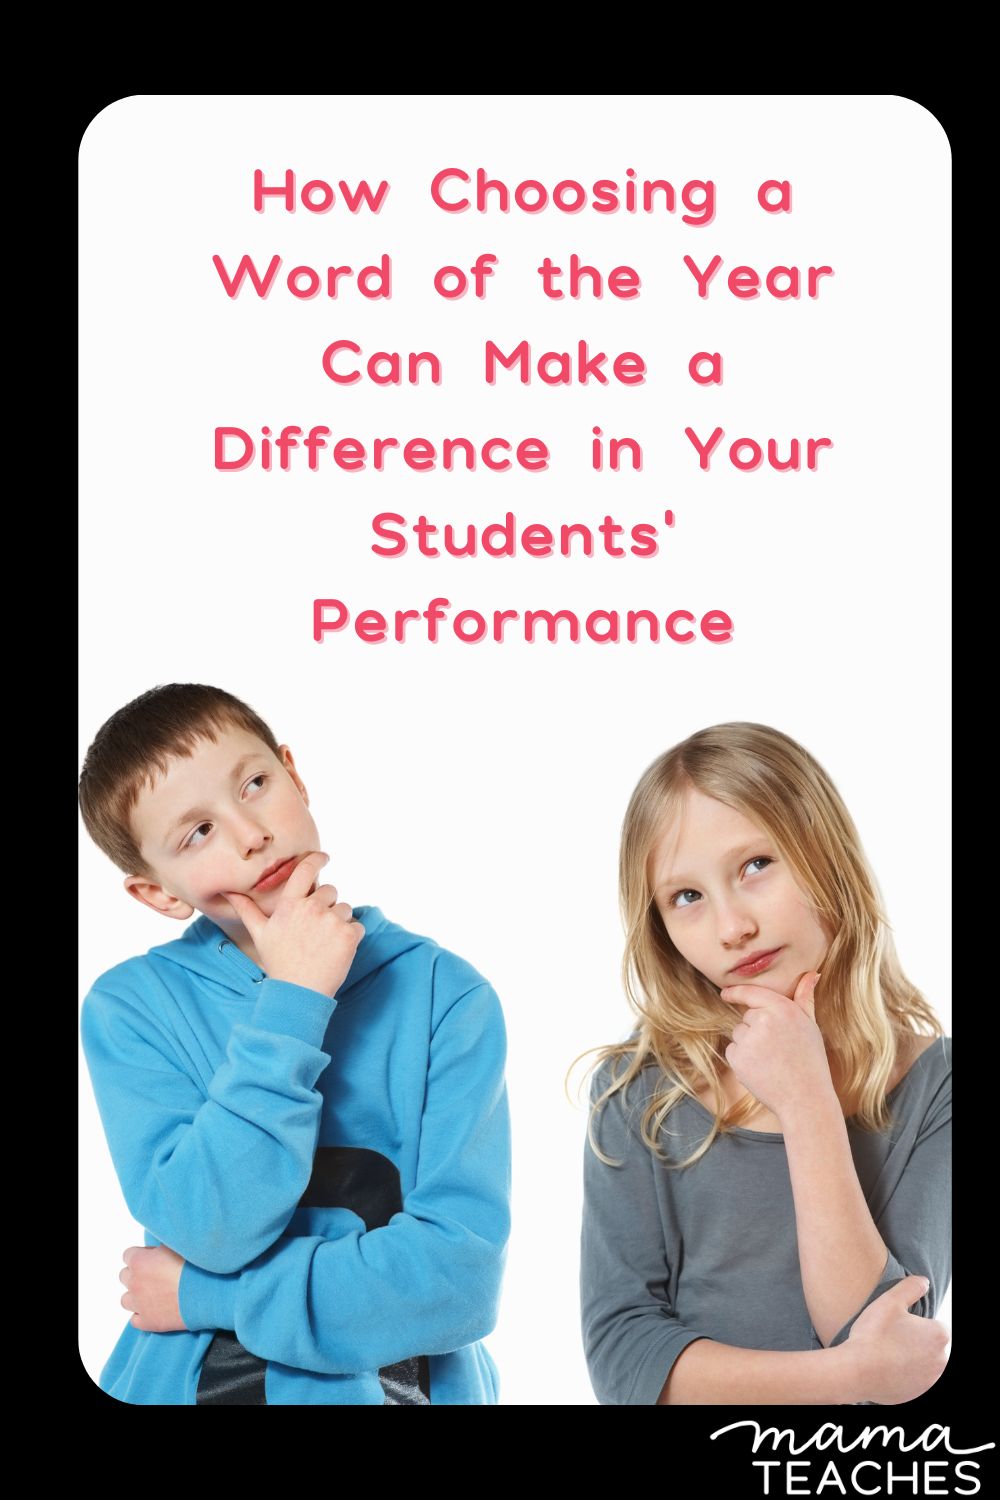 How Choosing a Word of the Year Can Make a Difference in Your Students’ Performance